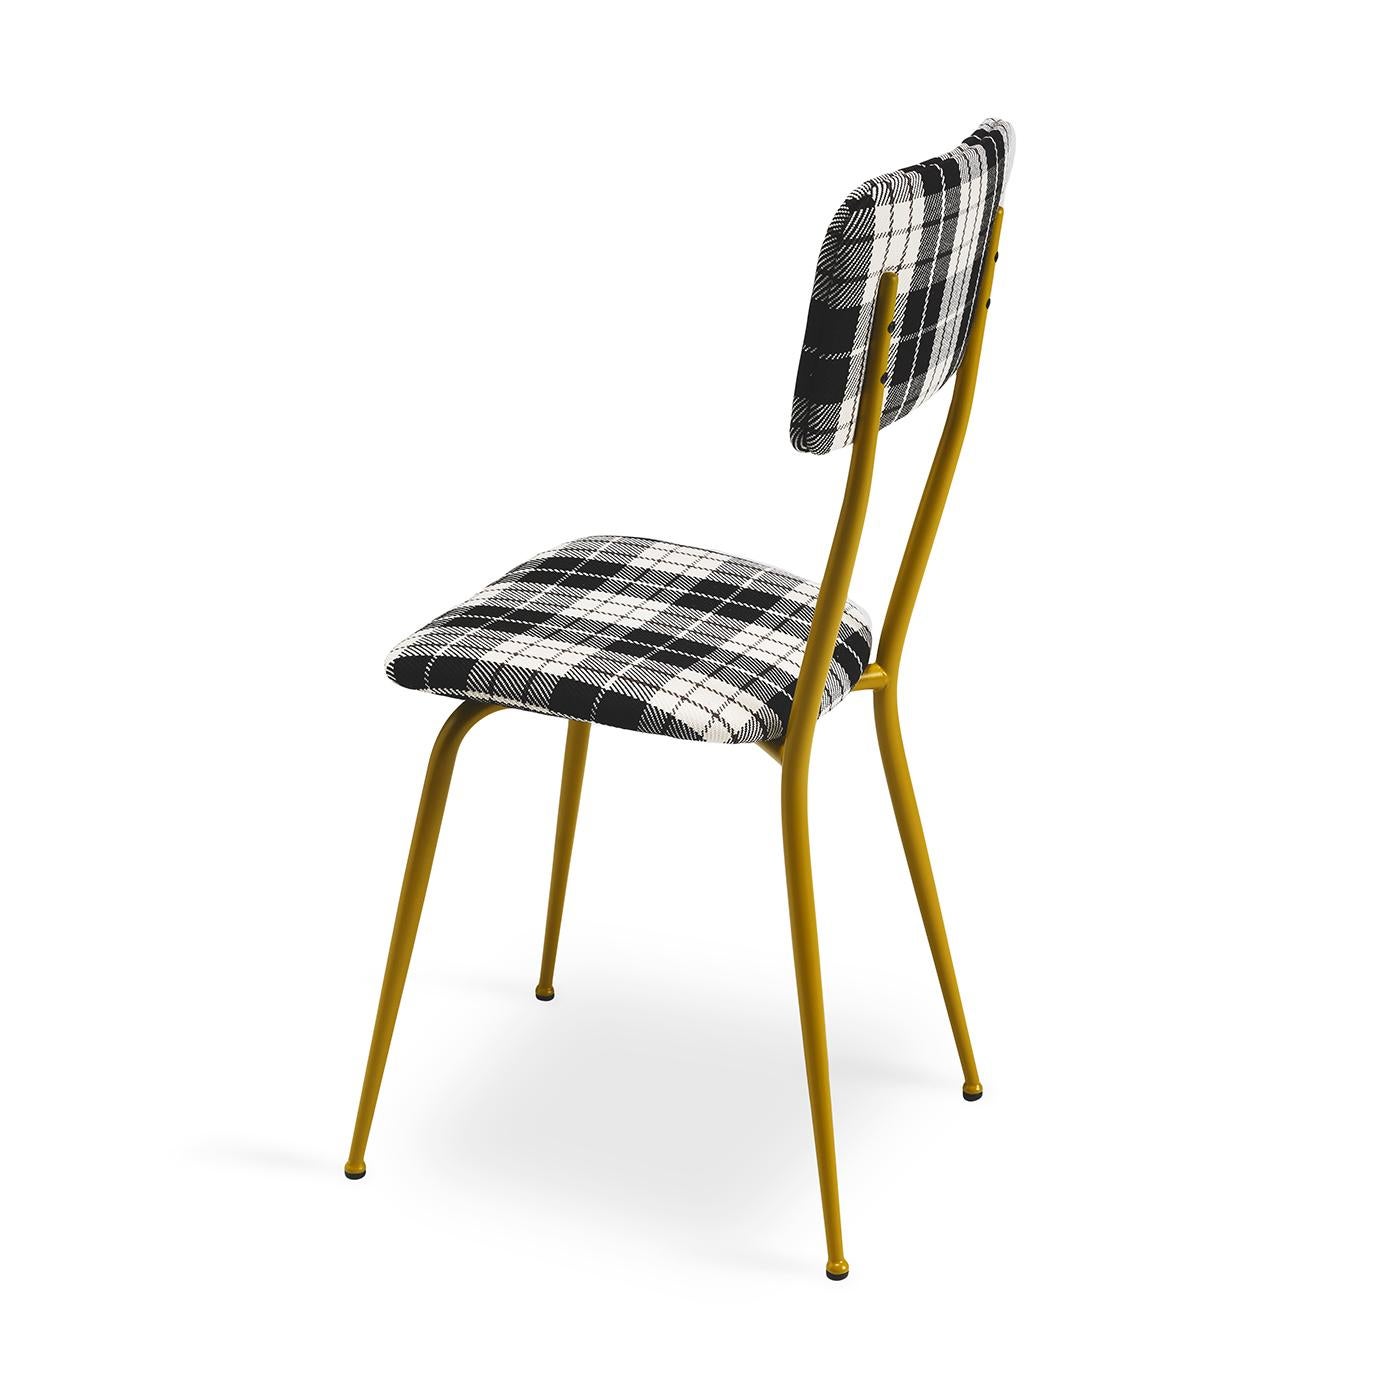 The Miss Ava 1 chair exudes an understated elegance with its sleek metal frame, boasting a matte tobacco lacquered finish that complements a variety of interior styles. Upholstered in elegant tartan fabric, this piece succeeds in fusing modern